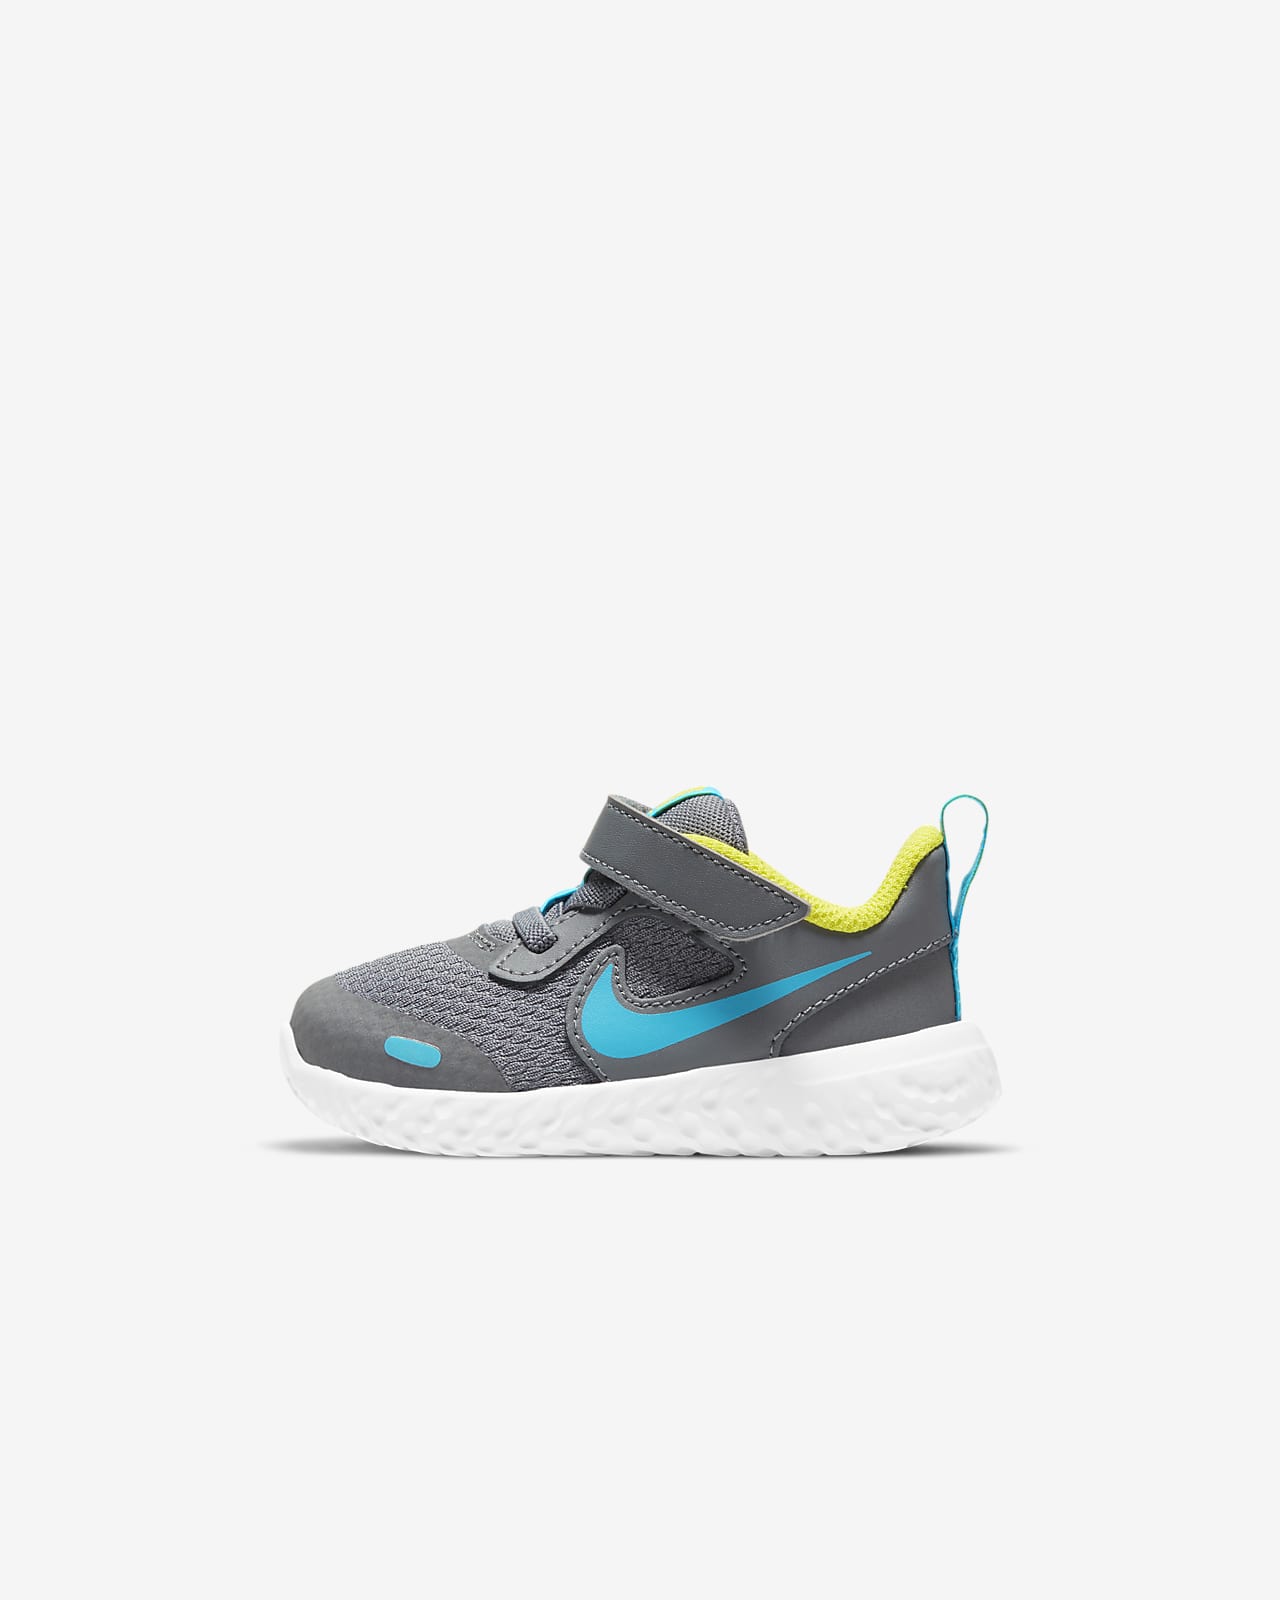 Nike Revolution 5 Baby and Toddler Shoe 